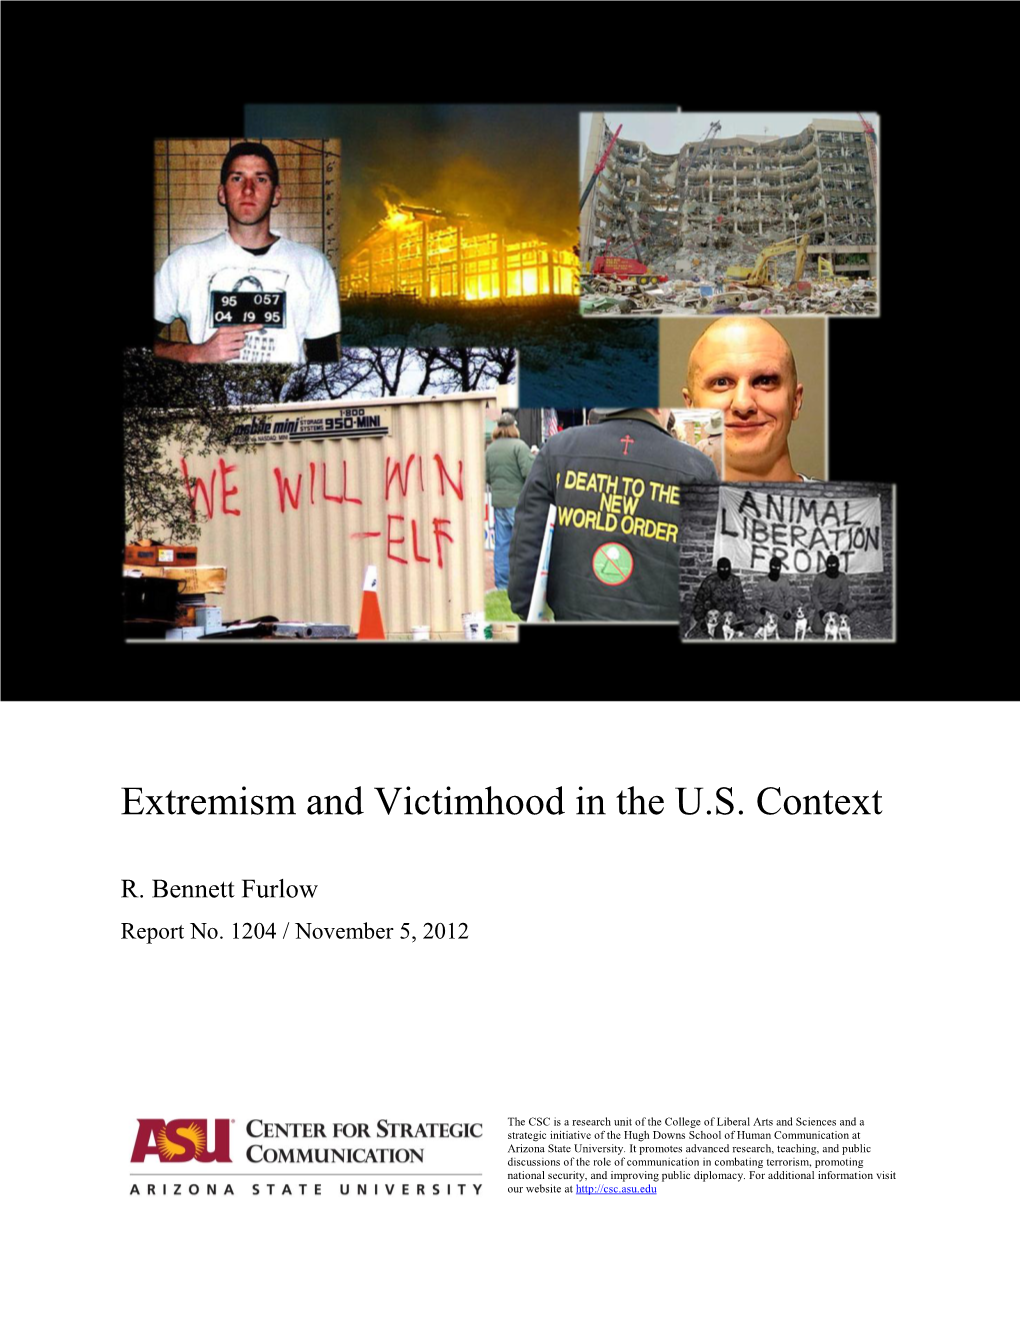 Extremism and Victimhood in the U.S. Context